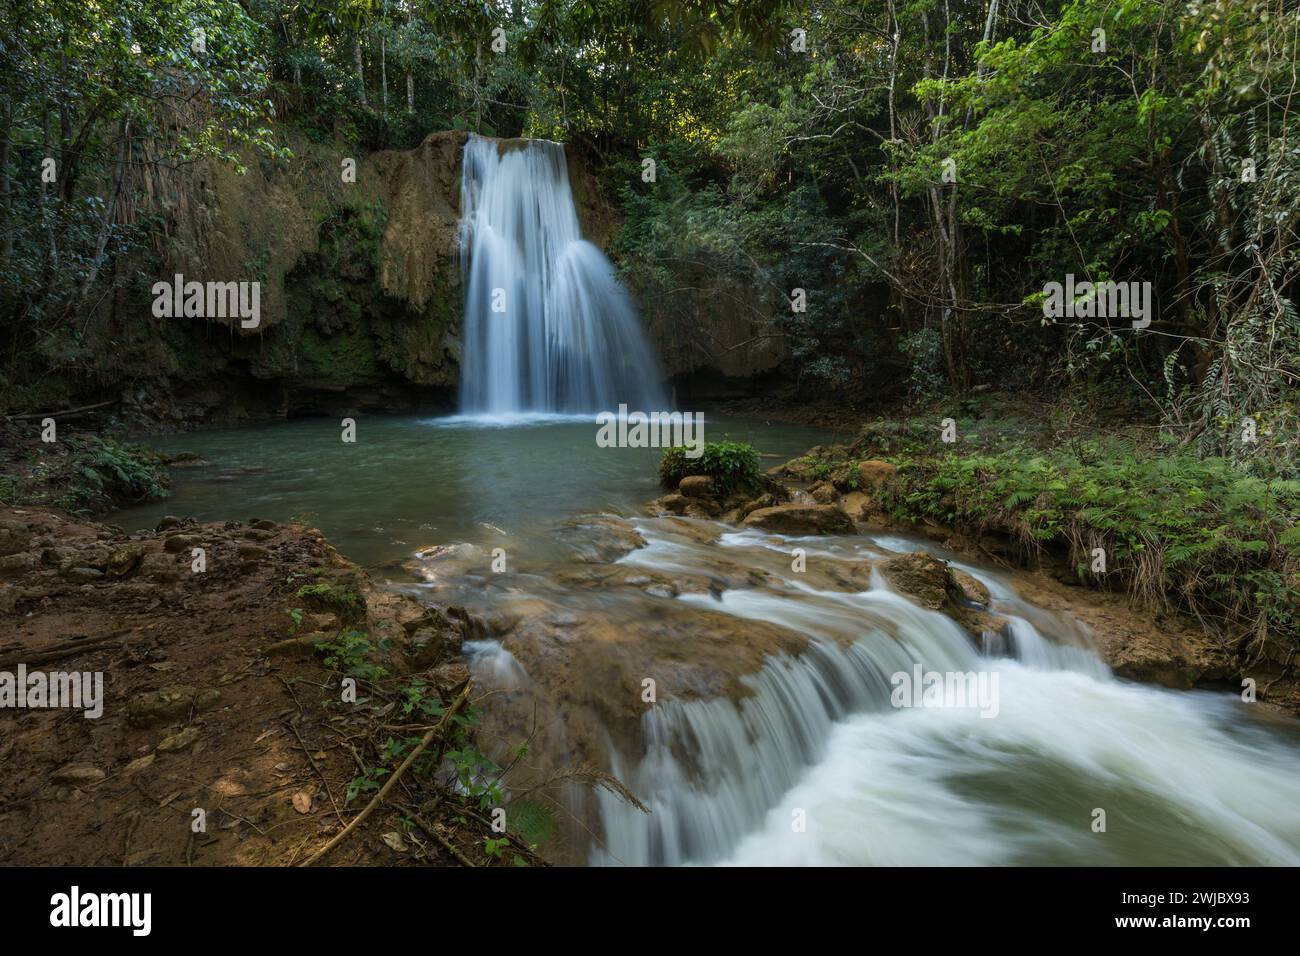 A smaller waterfall on the Limon River near the main waterfalls of El Limon in the  Dominican Republic.  A slow shutter speed was used to give the wat Stock Photo